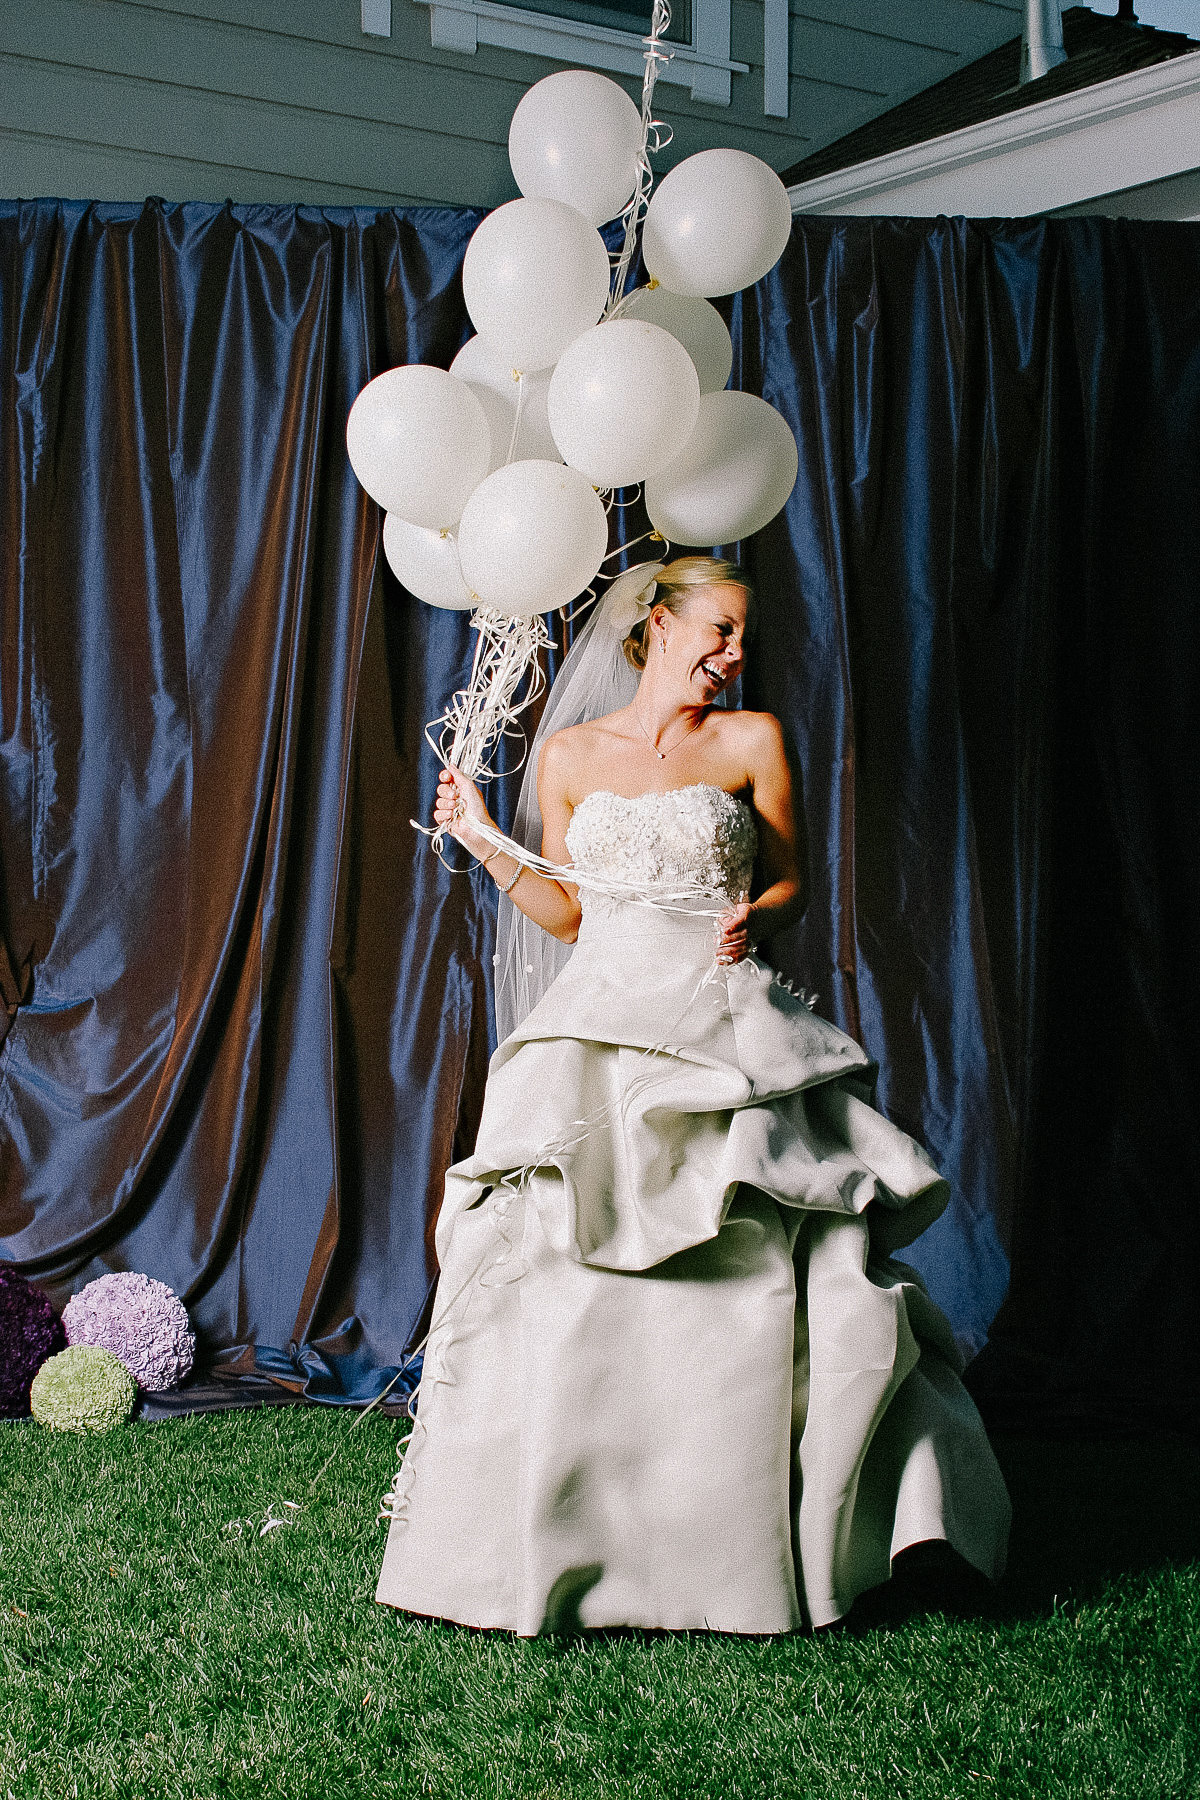 A bride poses with white balloons for her wedding in Napa.